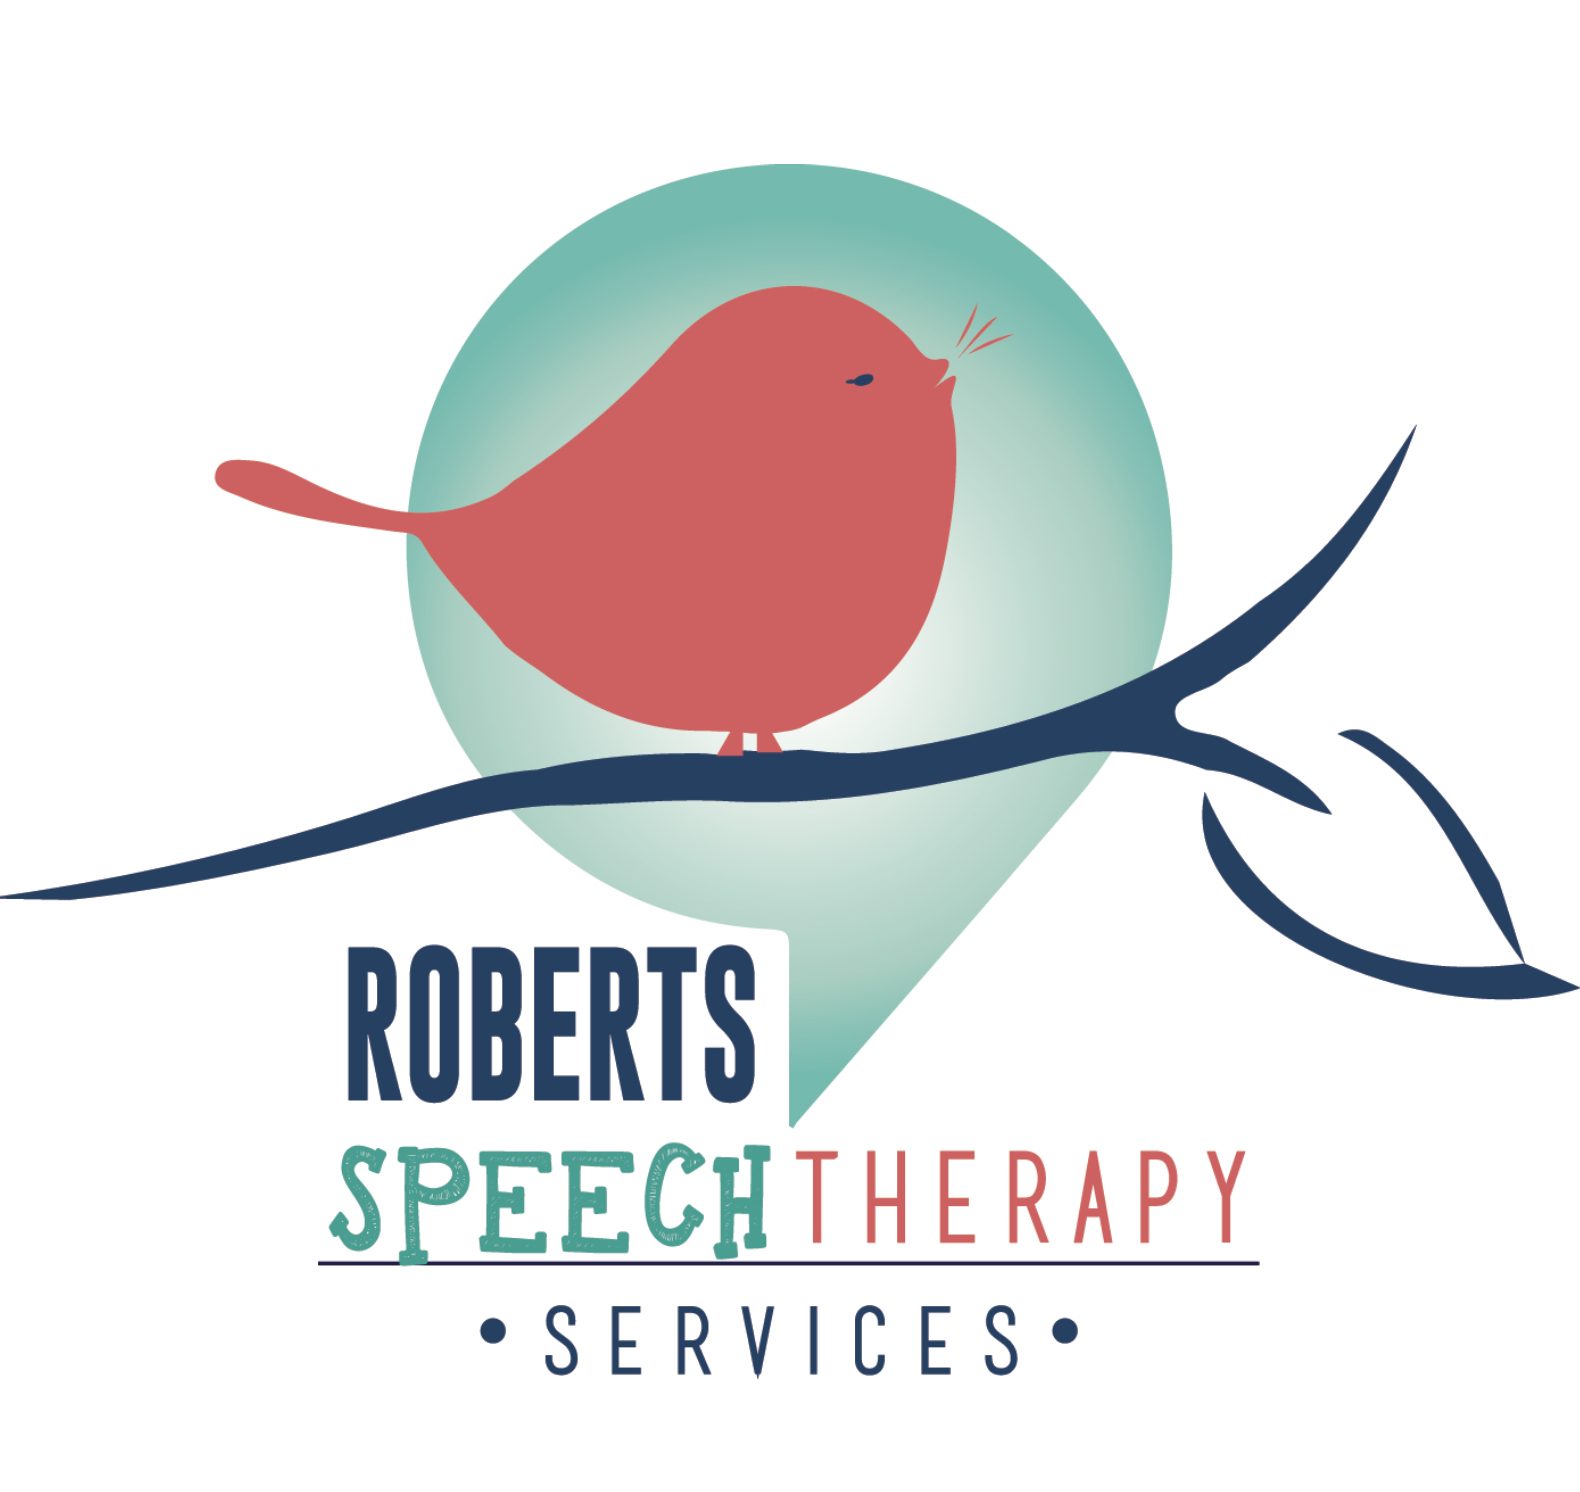 Roberts Speech Therapy